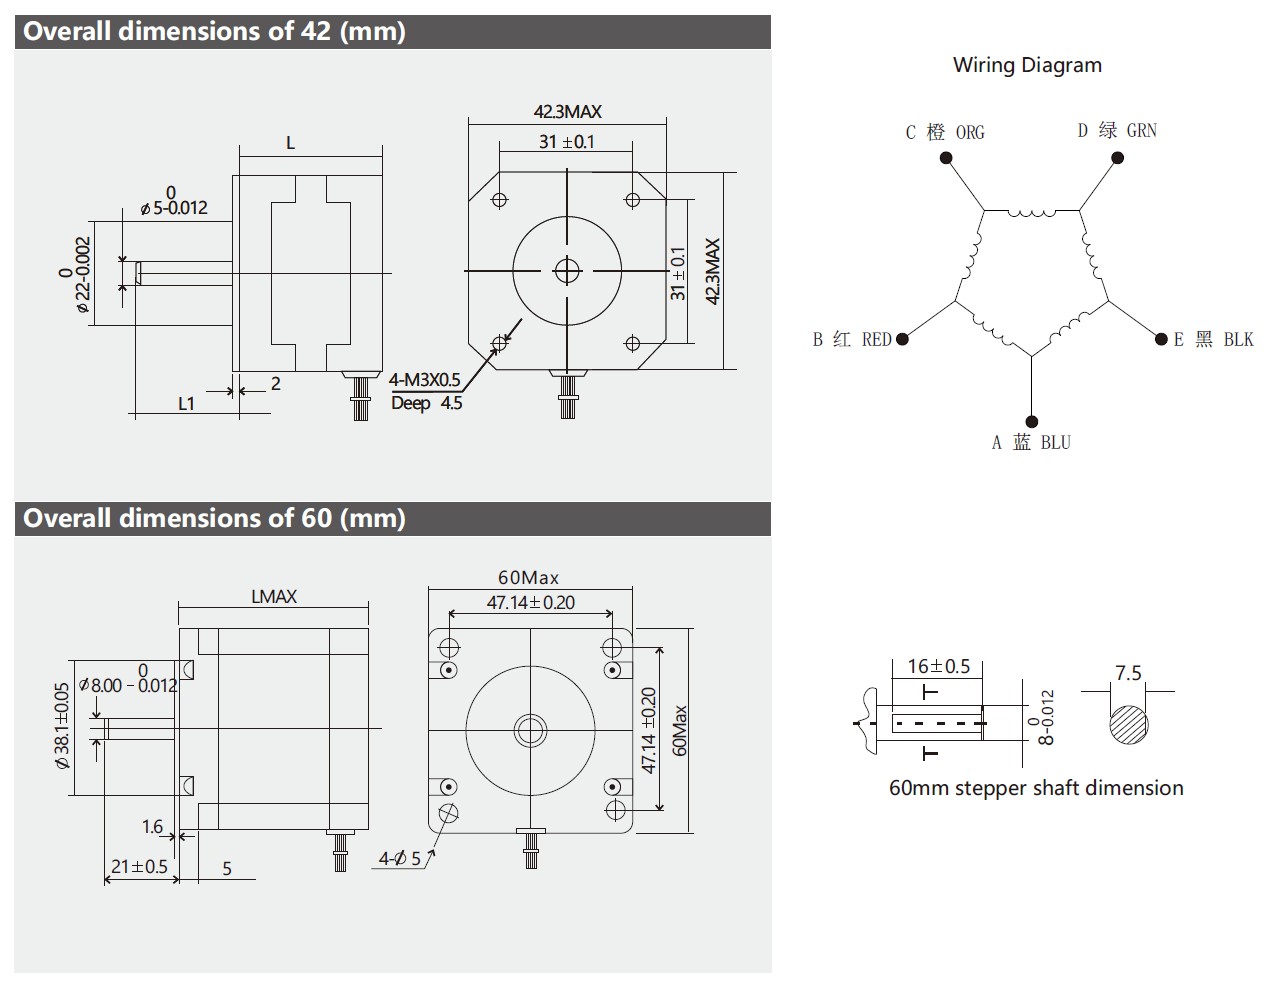 DimeDimensions of 5-phase stepper motor 42&60seriessions of 5-phase stepper motor 42&60series